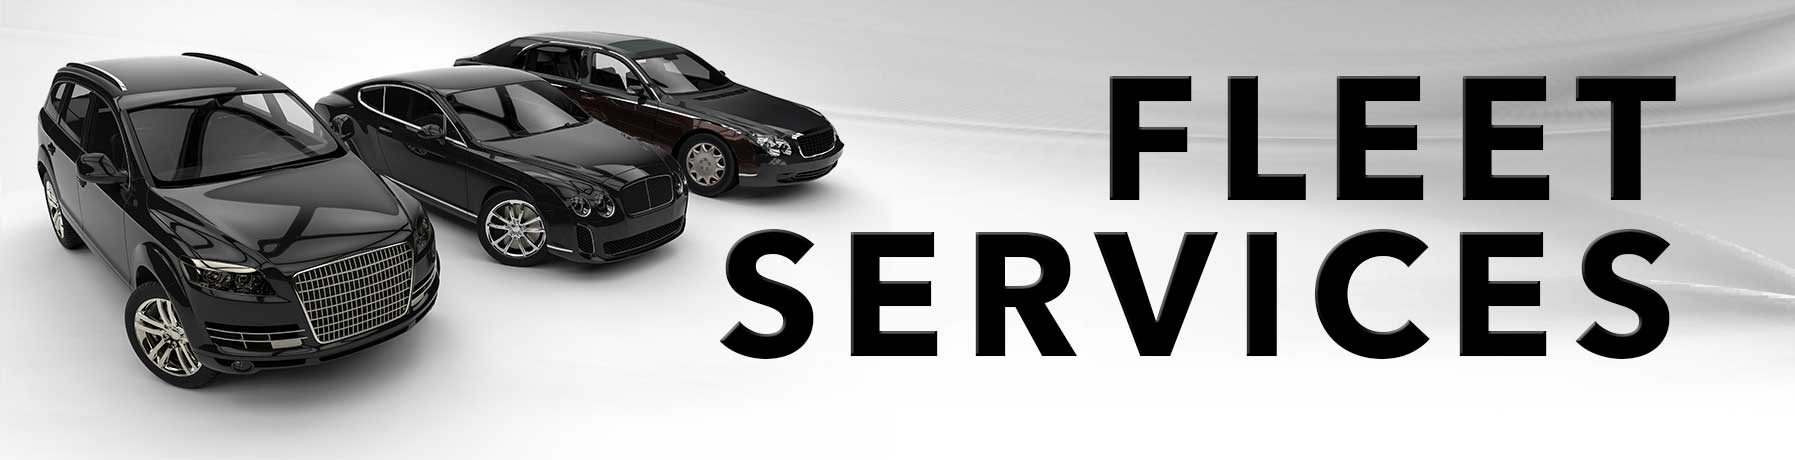 Fleet Service banner image with picture of three fleet vehicles